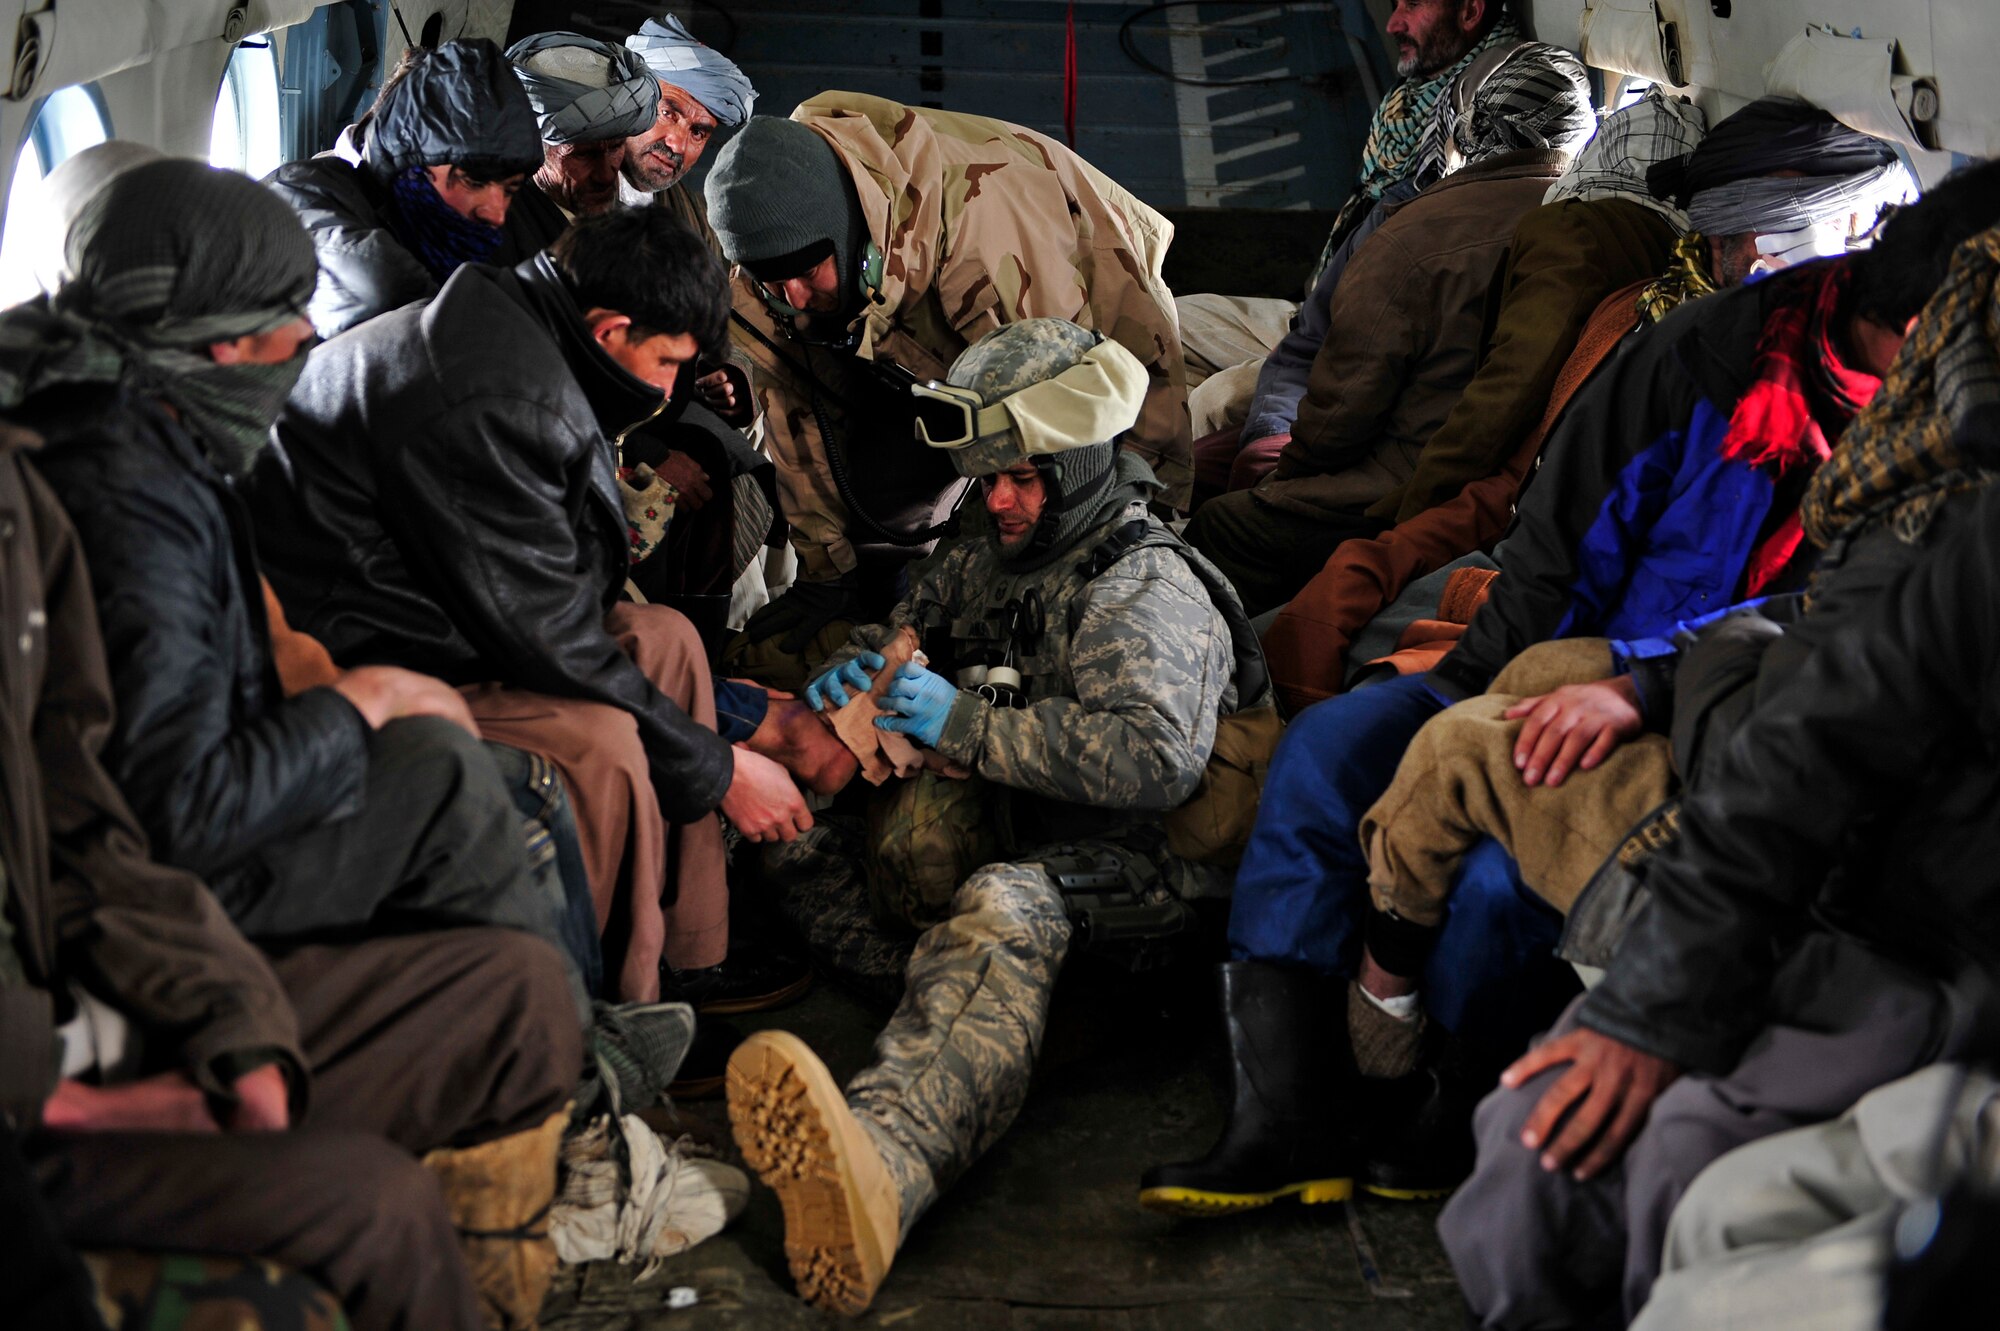 Master Sgt. Chris Banks, a medic with the 438th Air Expeditionary Advisory Group, attends to injured village members on an Mi-17 helicopter Jan 24, 2012. American and Afghan Airmen conducted a rescue mission in Badakshan province; Afghanistan after an avalanche trapped and injured members of Shewa Village. (U.S. Air Force photo/ Master Sgt. Shane A. Cuomo)